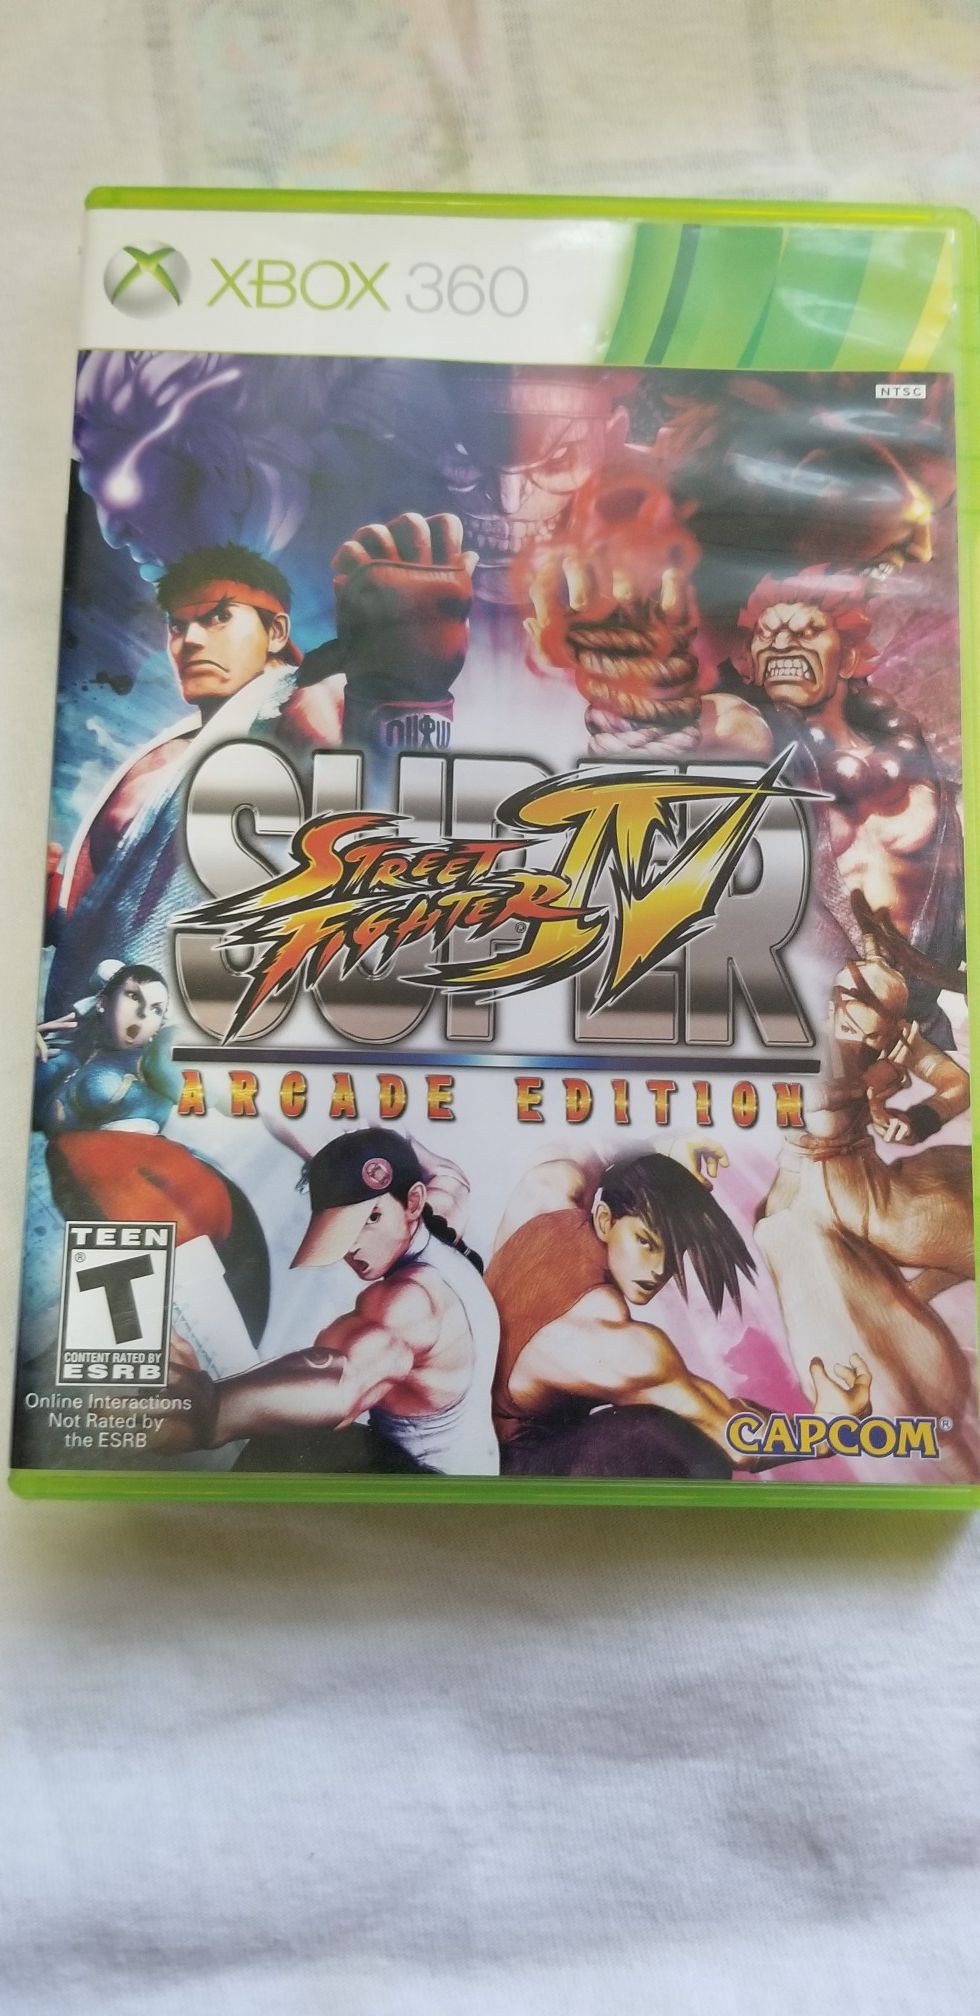 Super Street Fighter IV Xbox 360 Game For Sale